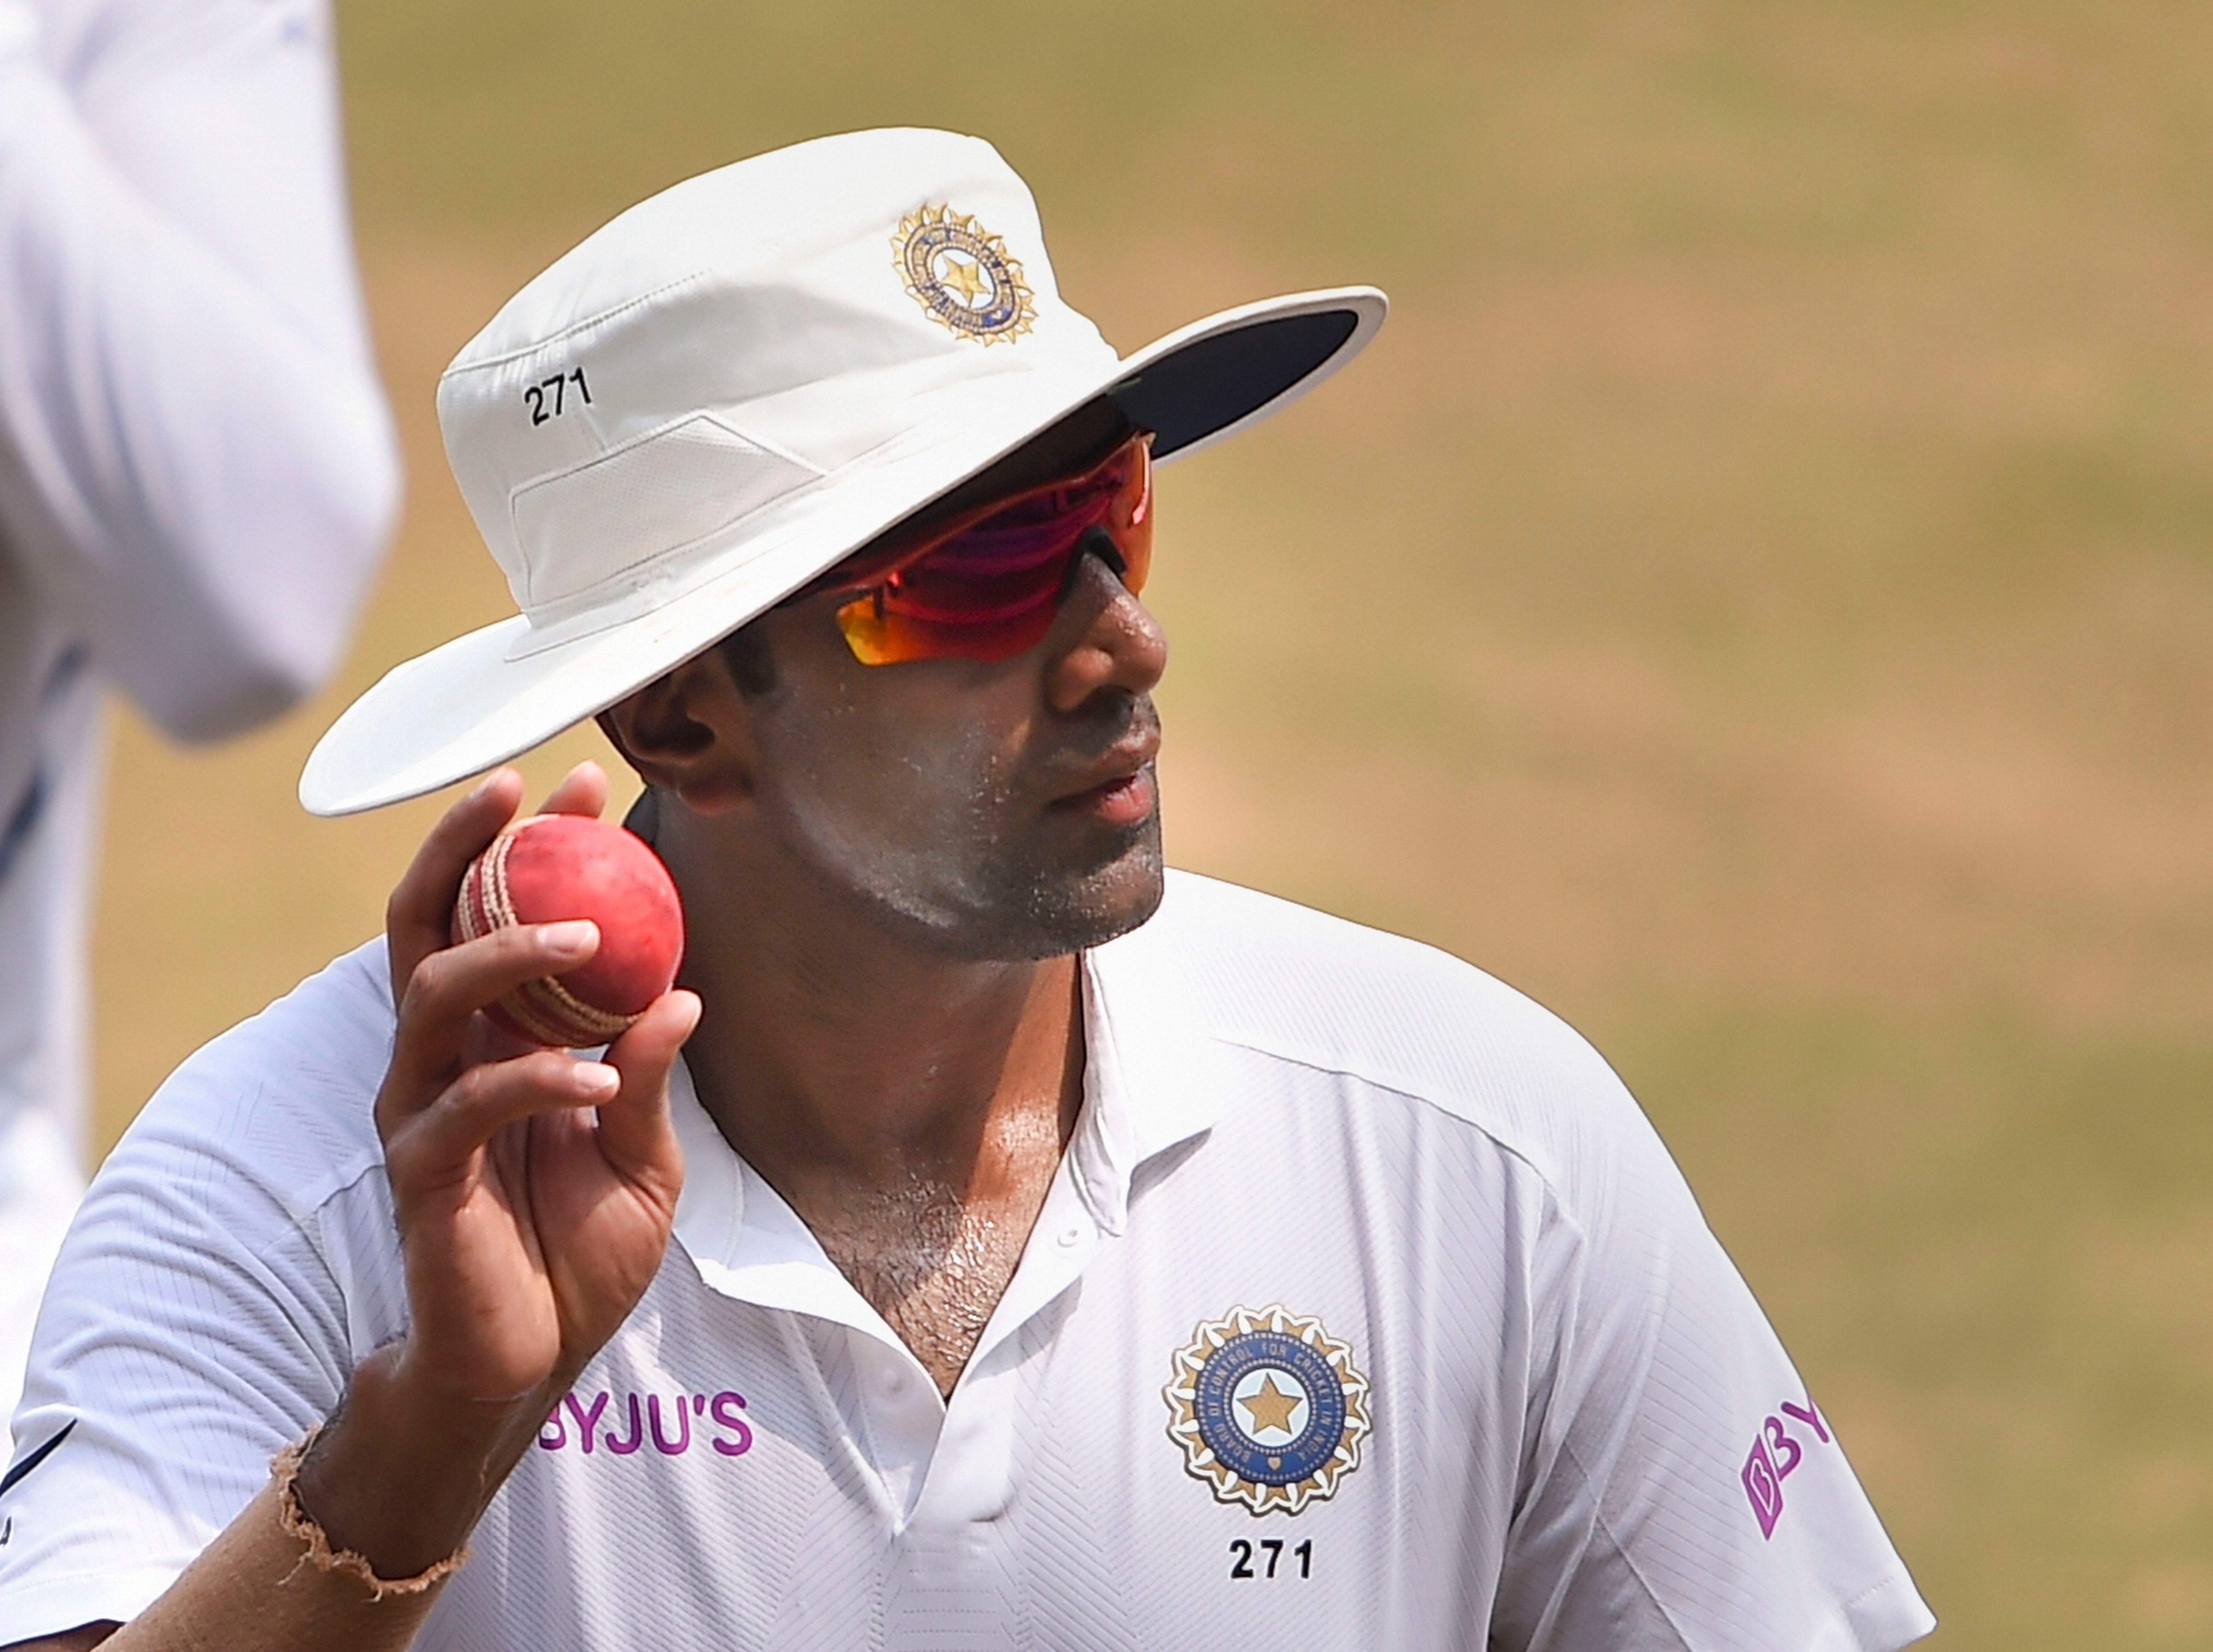  India's Ravichandran Ashwin holds the ball while leaving the ground at the end of the first innings of South Africa (PTI file photo)